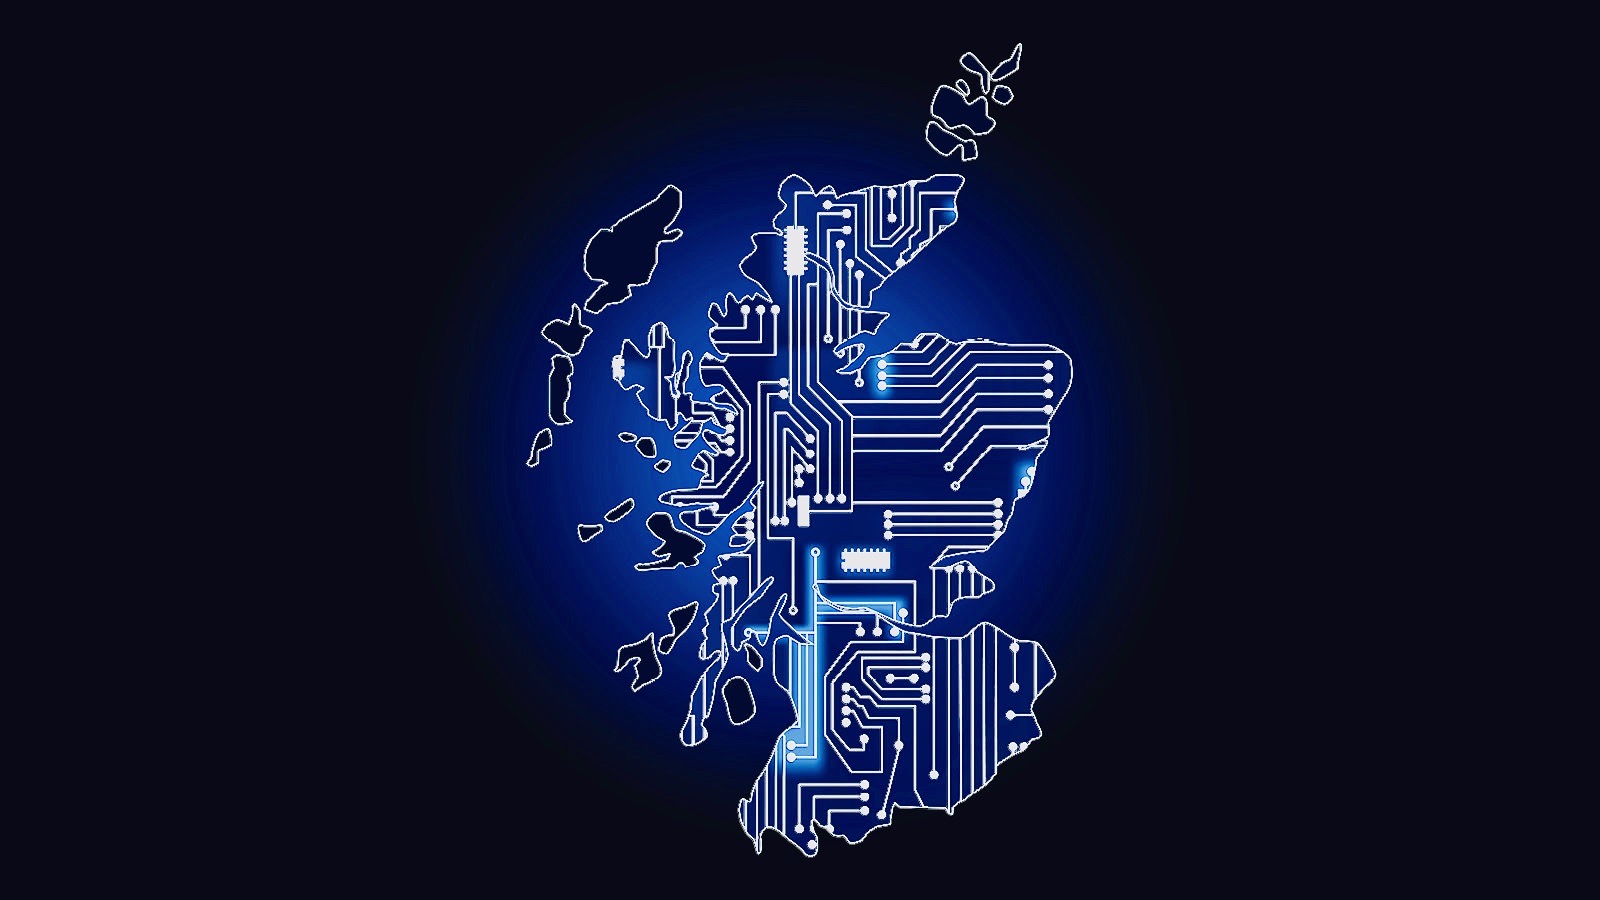 A circuit board effect over Scotland against a dark background